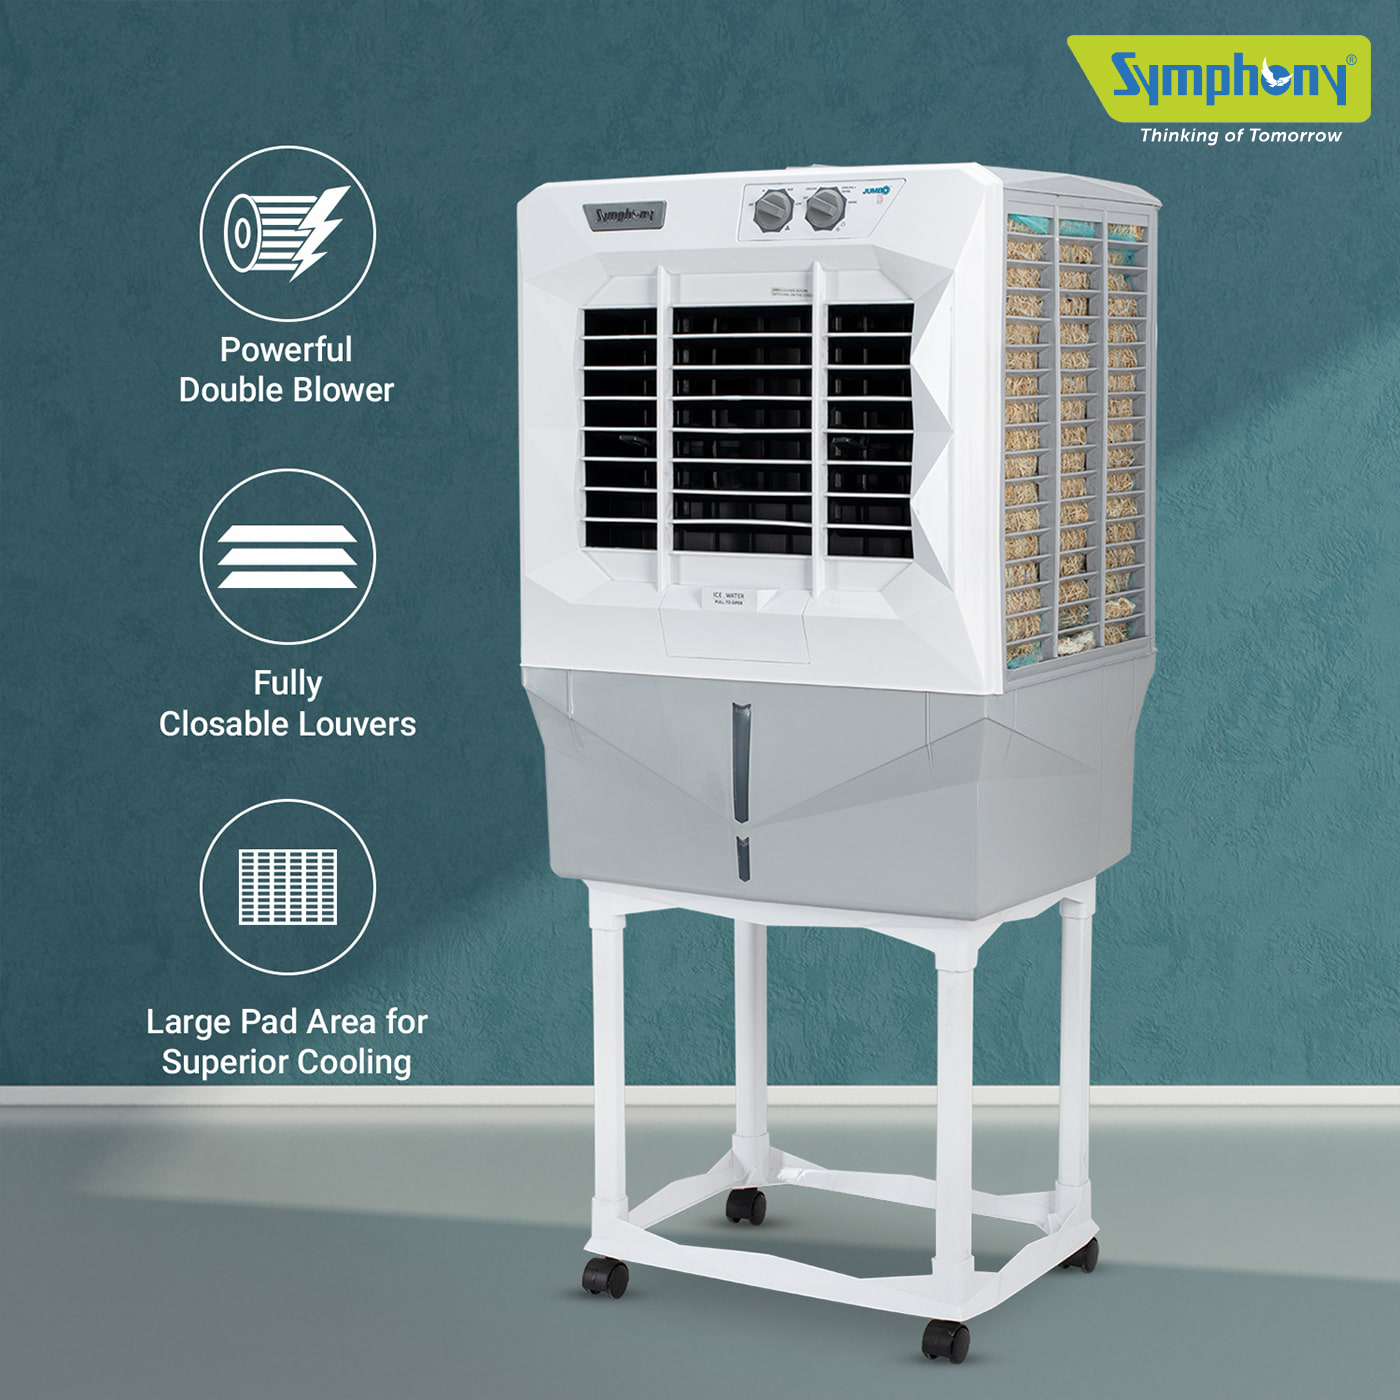 Symphony Cooler Distributor in Indore